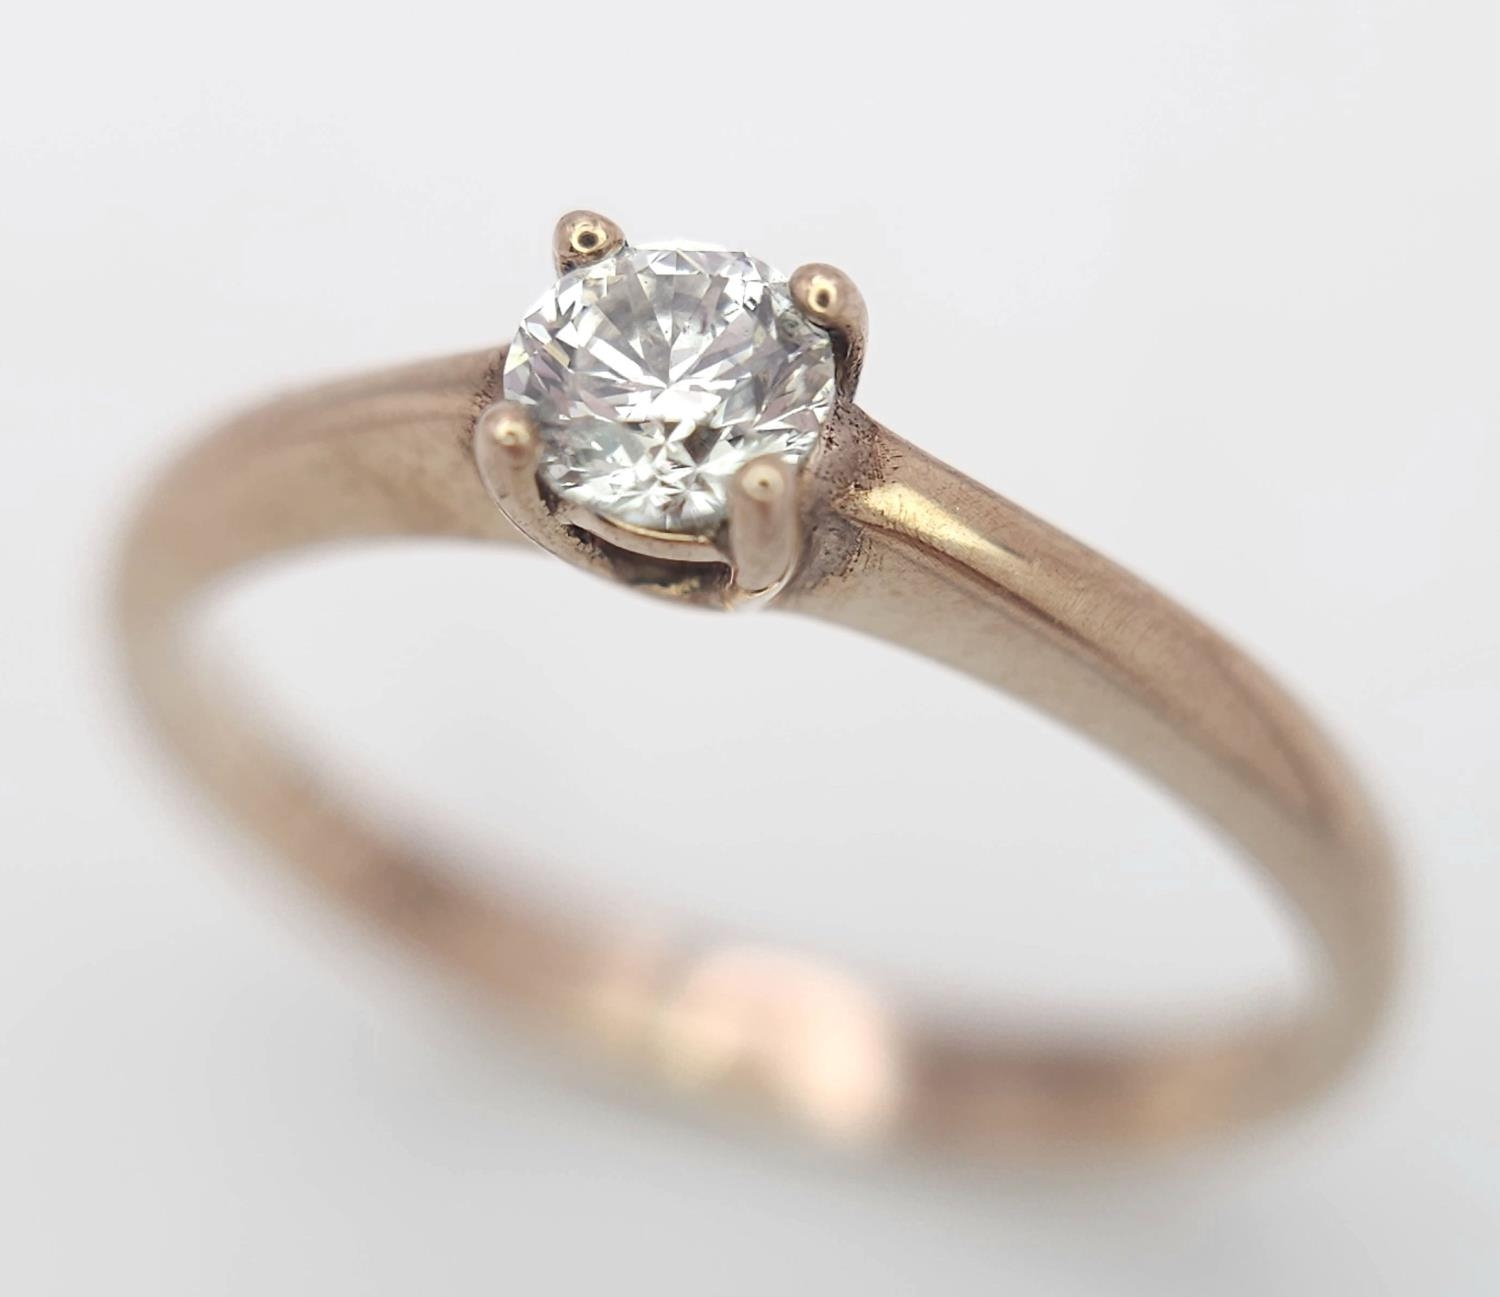 A 9K Rose Gold Diamond Solitaire Ring. 0.10ct round cut diamond. Size N. 2g total weight. - Image 2 of 7